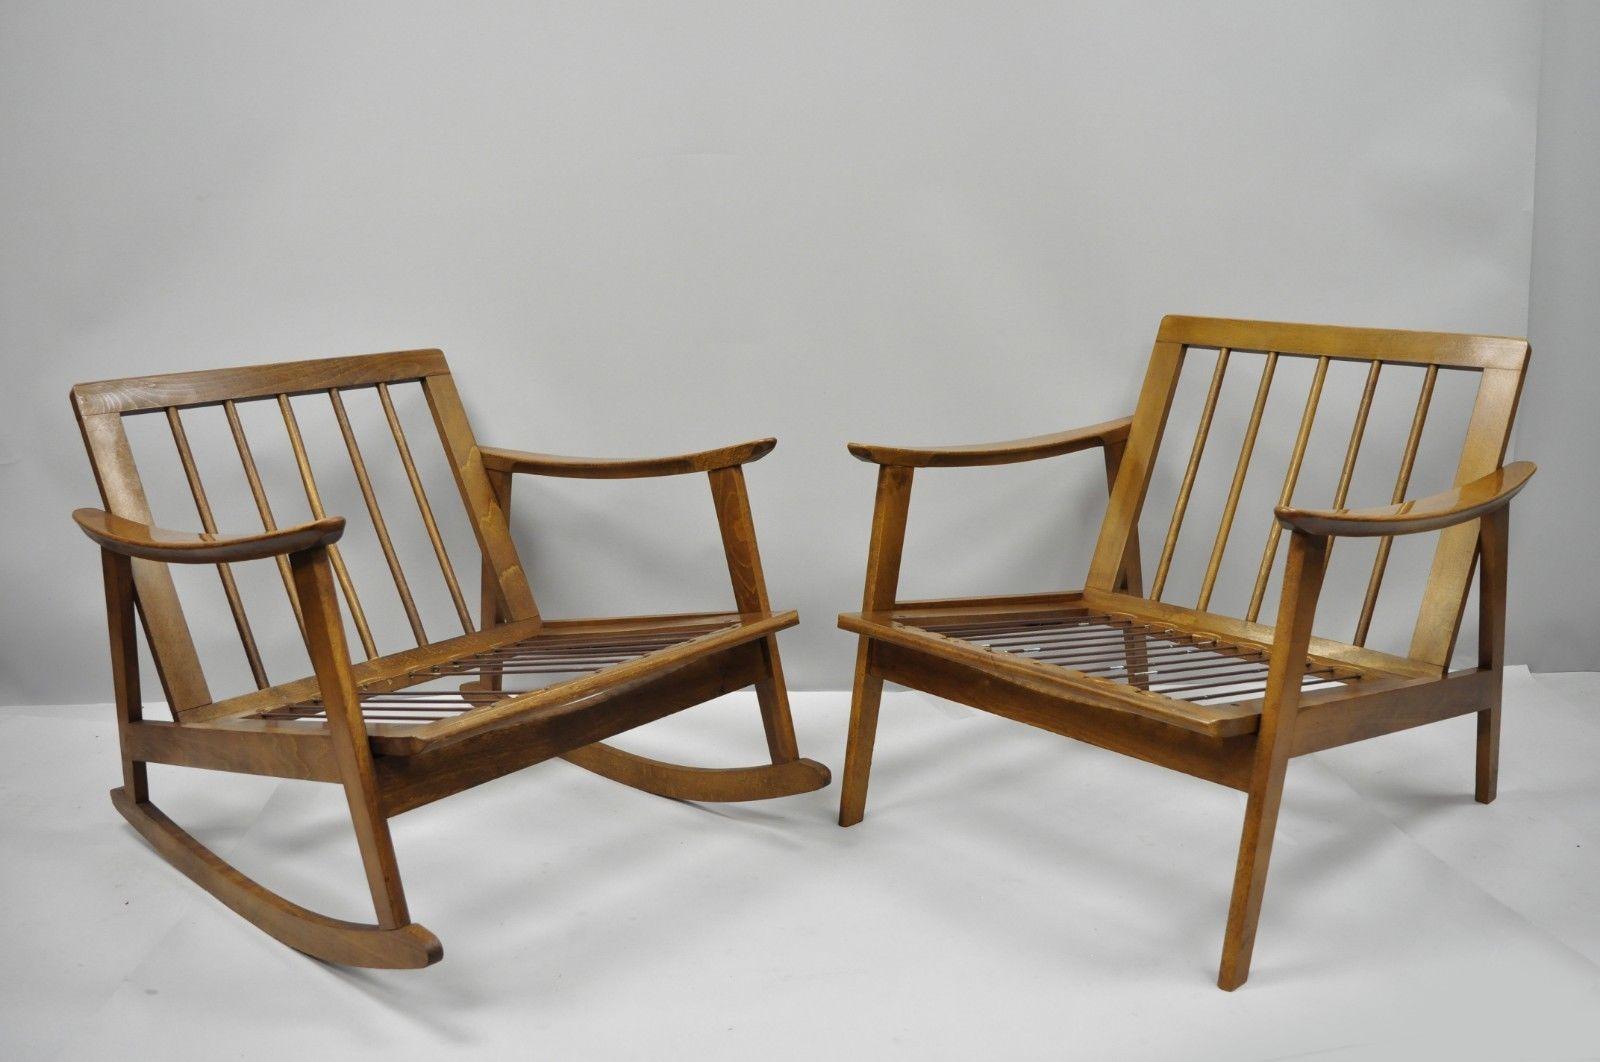 Vintage complimenting pair of Mid-Century Modern Danish style lounge chairs (One Rocker and one Armchair). Item features one lounge chair, one rocking chair, spindle back, reversible zip-off cushions, solid wood frame, beautiful wood grain, tapered